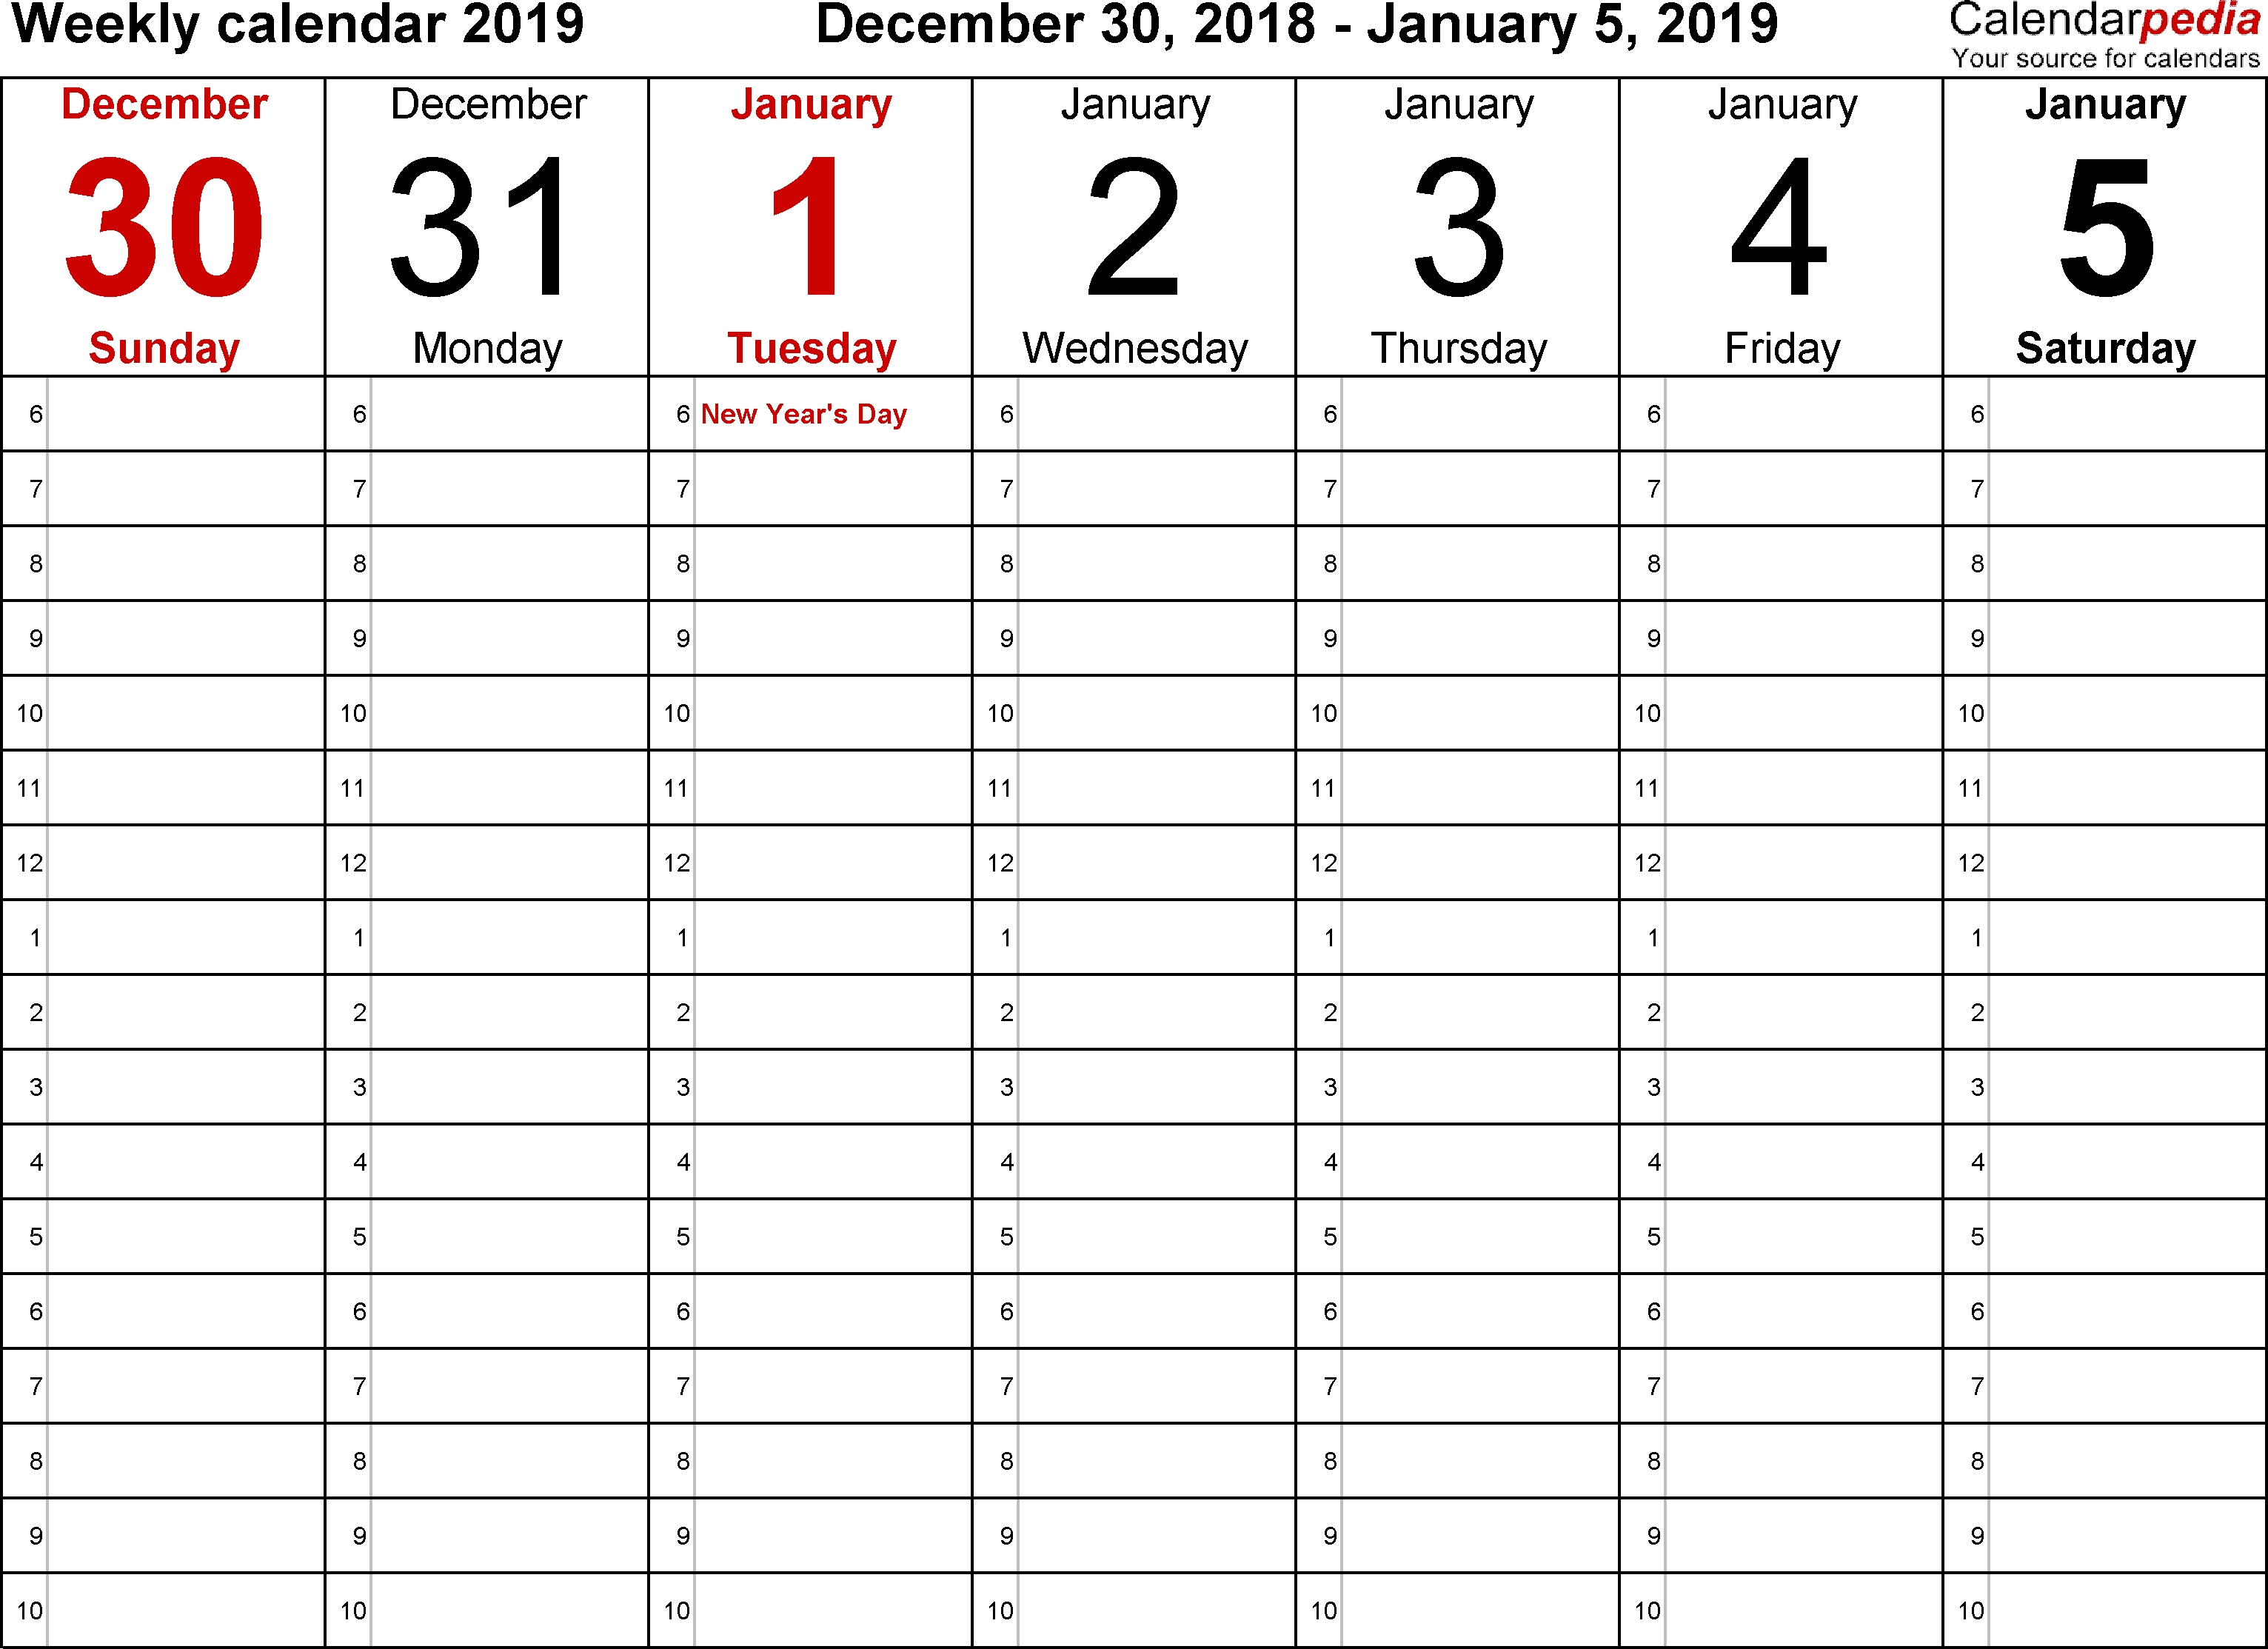 Weekly Calendars 2019 For Word - 12 Free Printable Templates